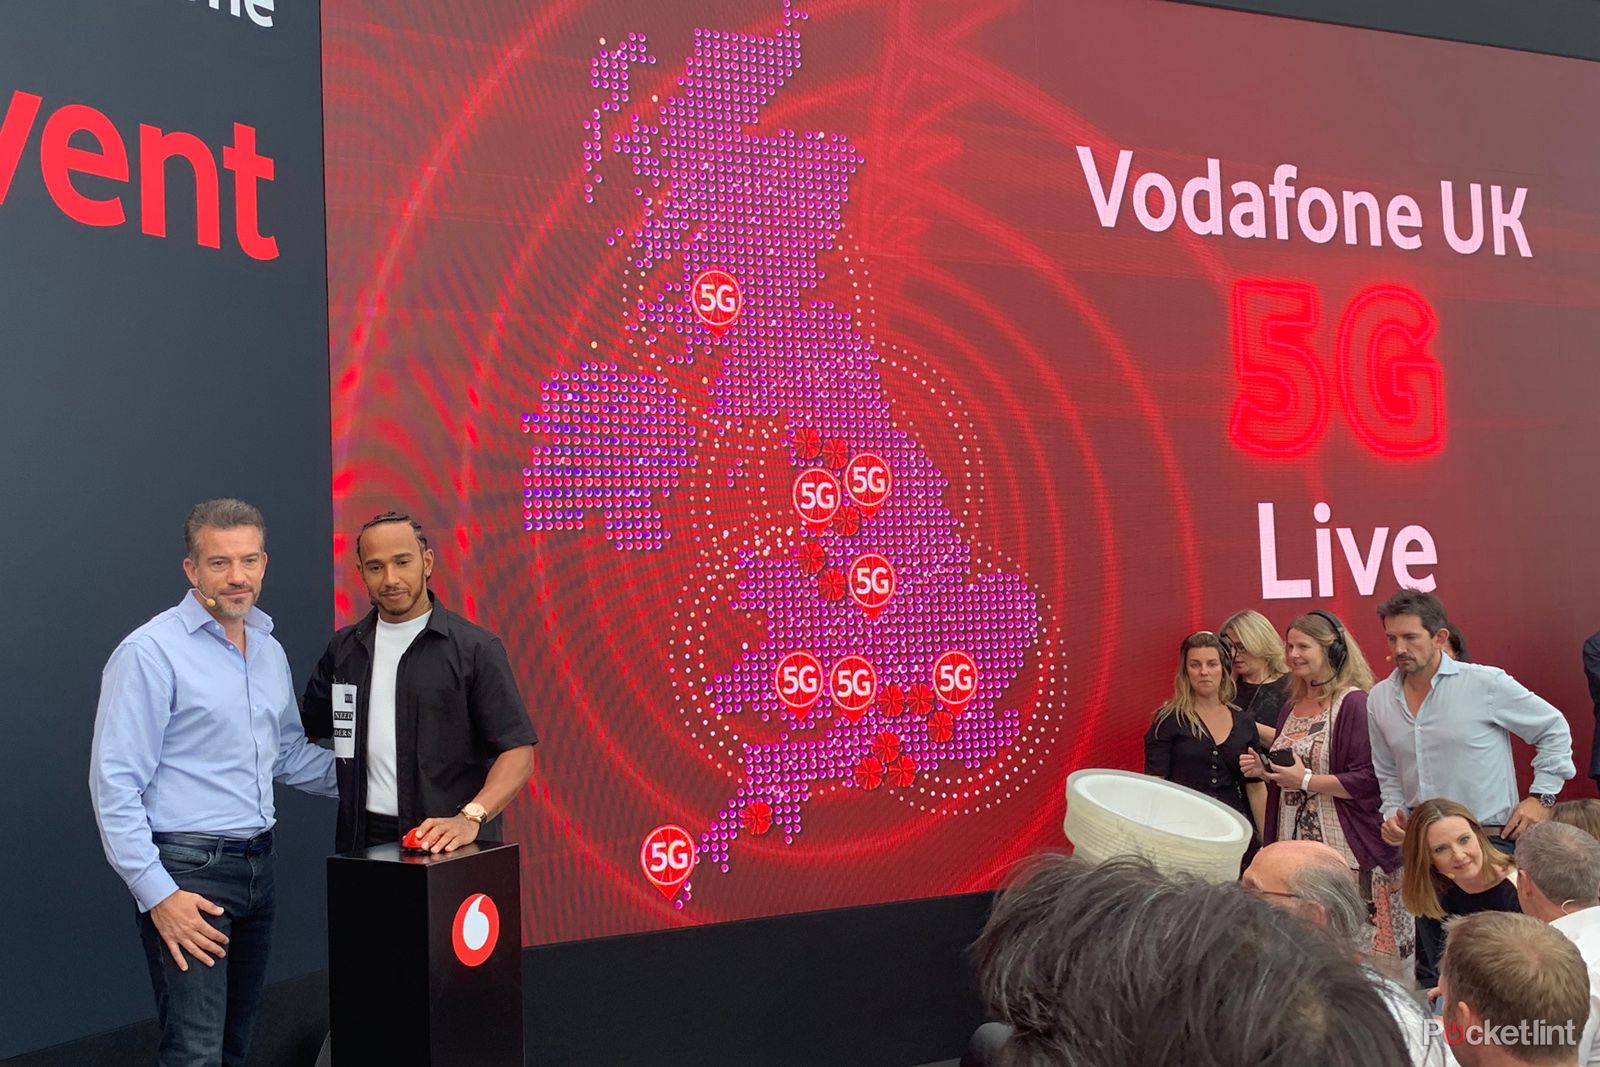 Vodafones 5g Network Goes Live Today image 5